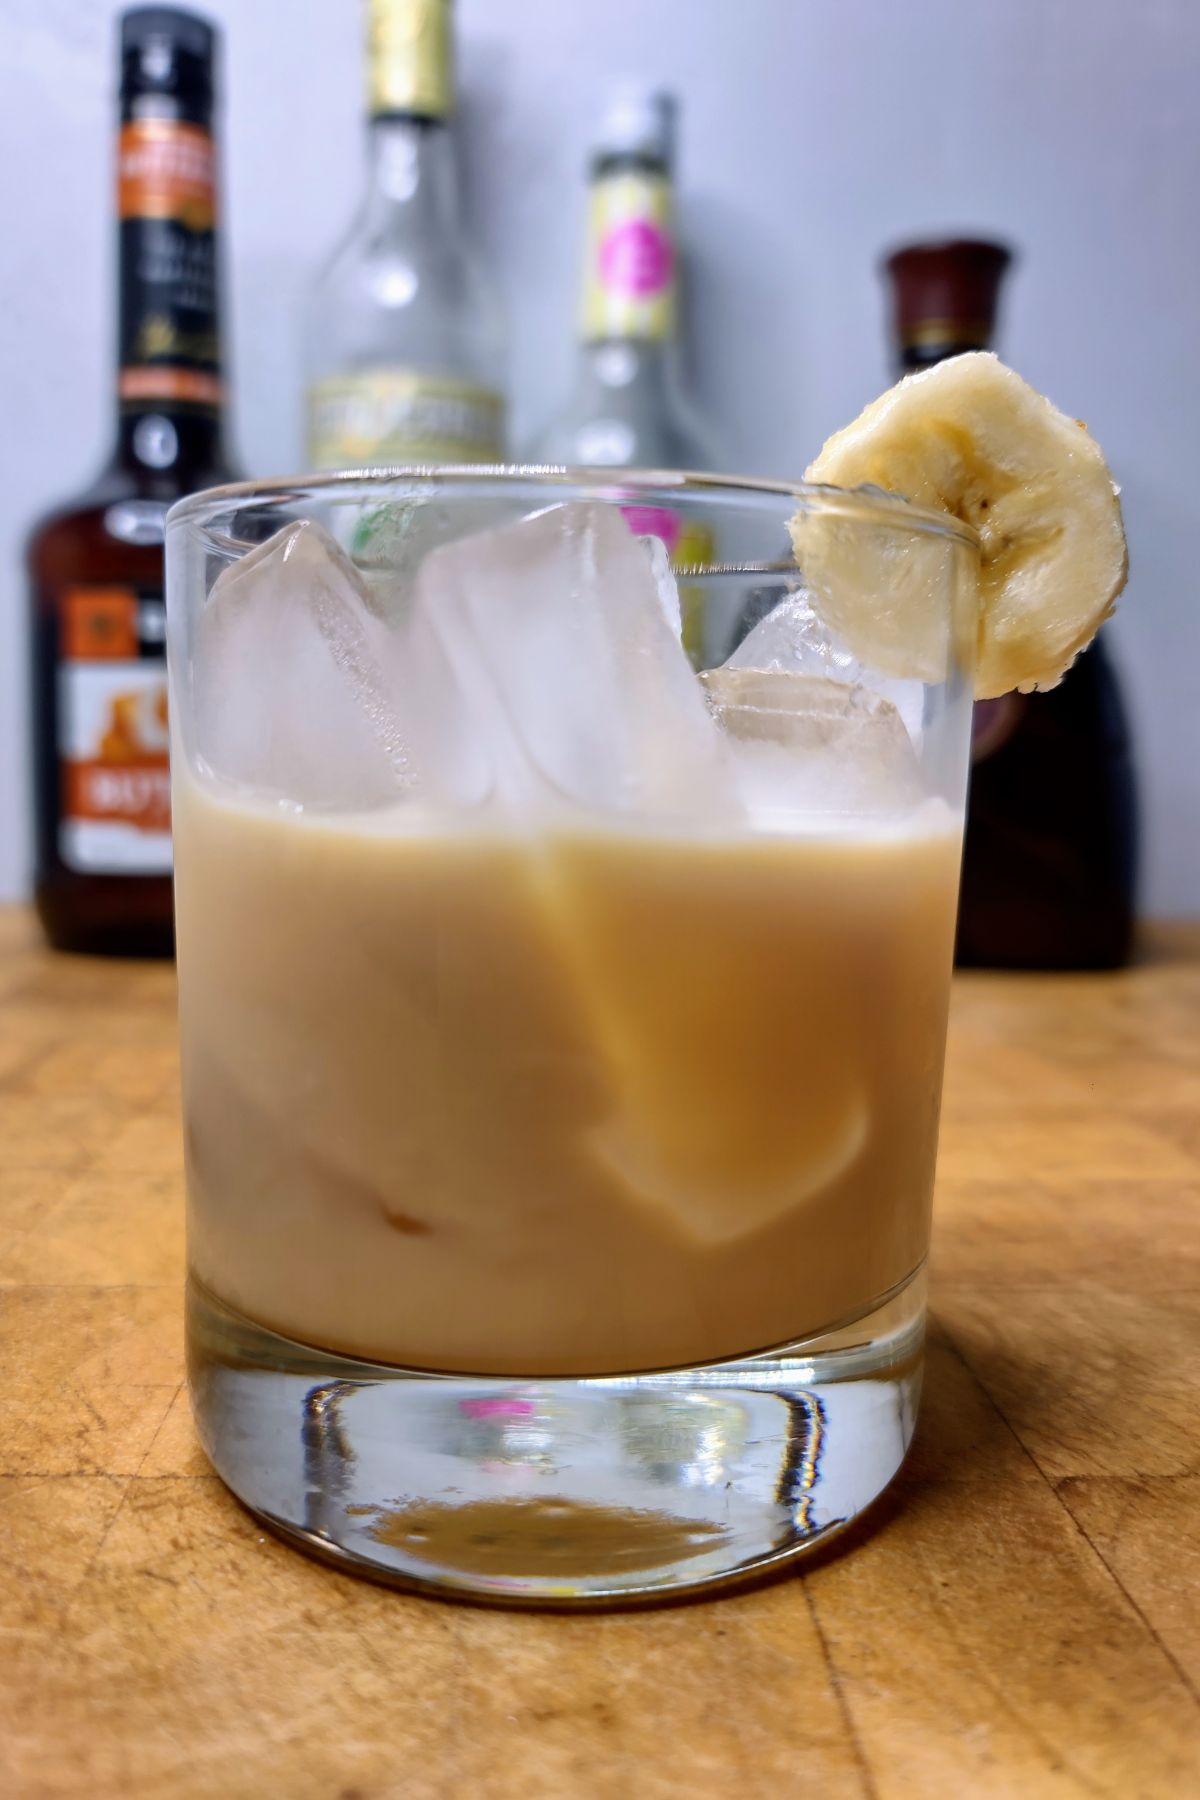 Banana foster drink on a wooden table.